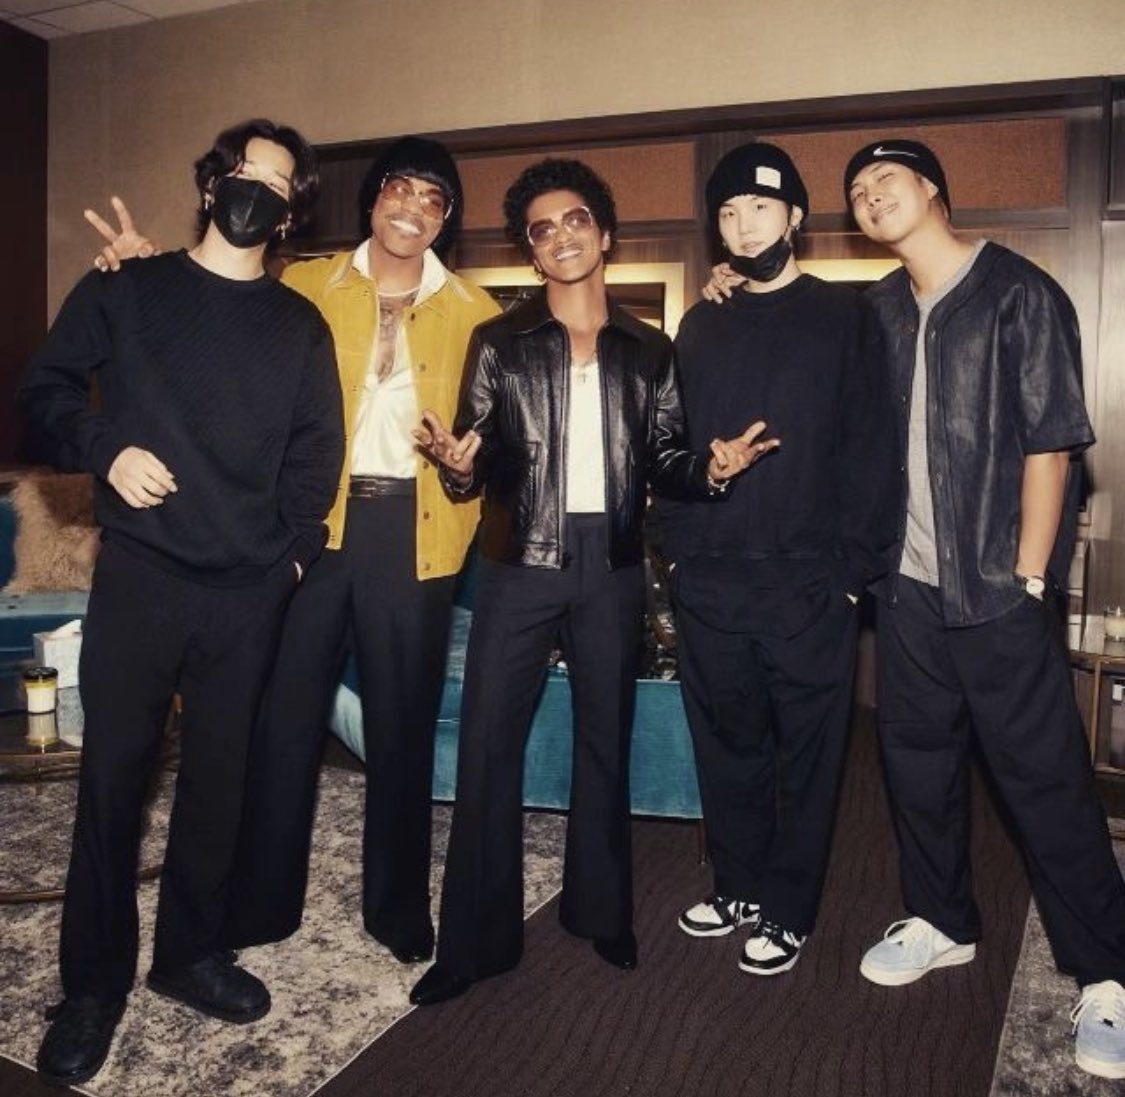 RT @charts_k: Jimin, RM, and Suga with Silk Sonic in Las Vegas!

@BTS_twt @silksonic https://t.co/eHHrt7hqcO